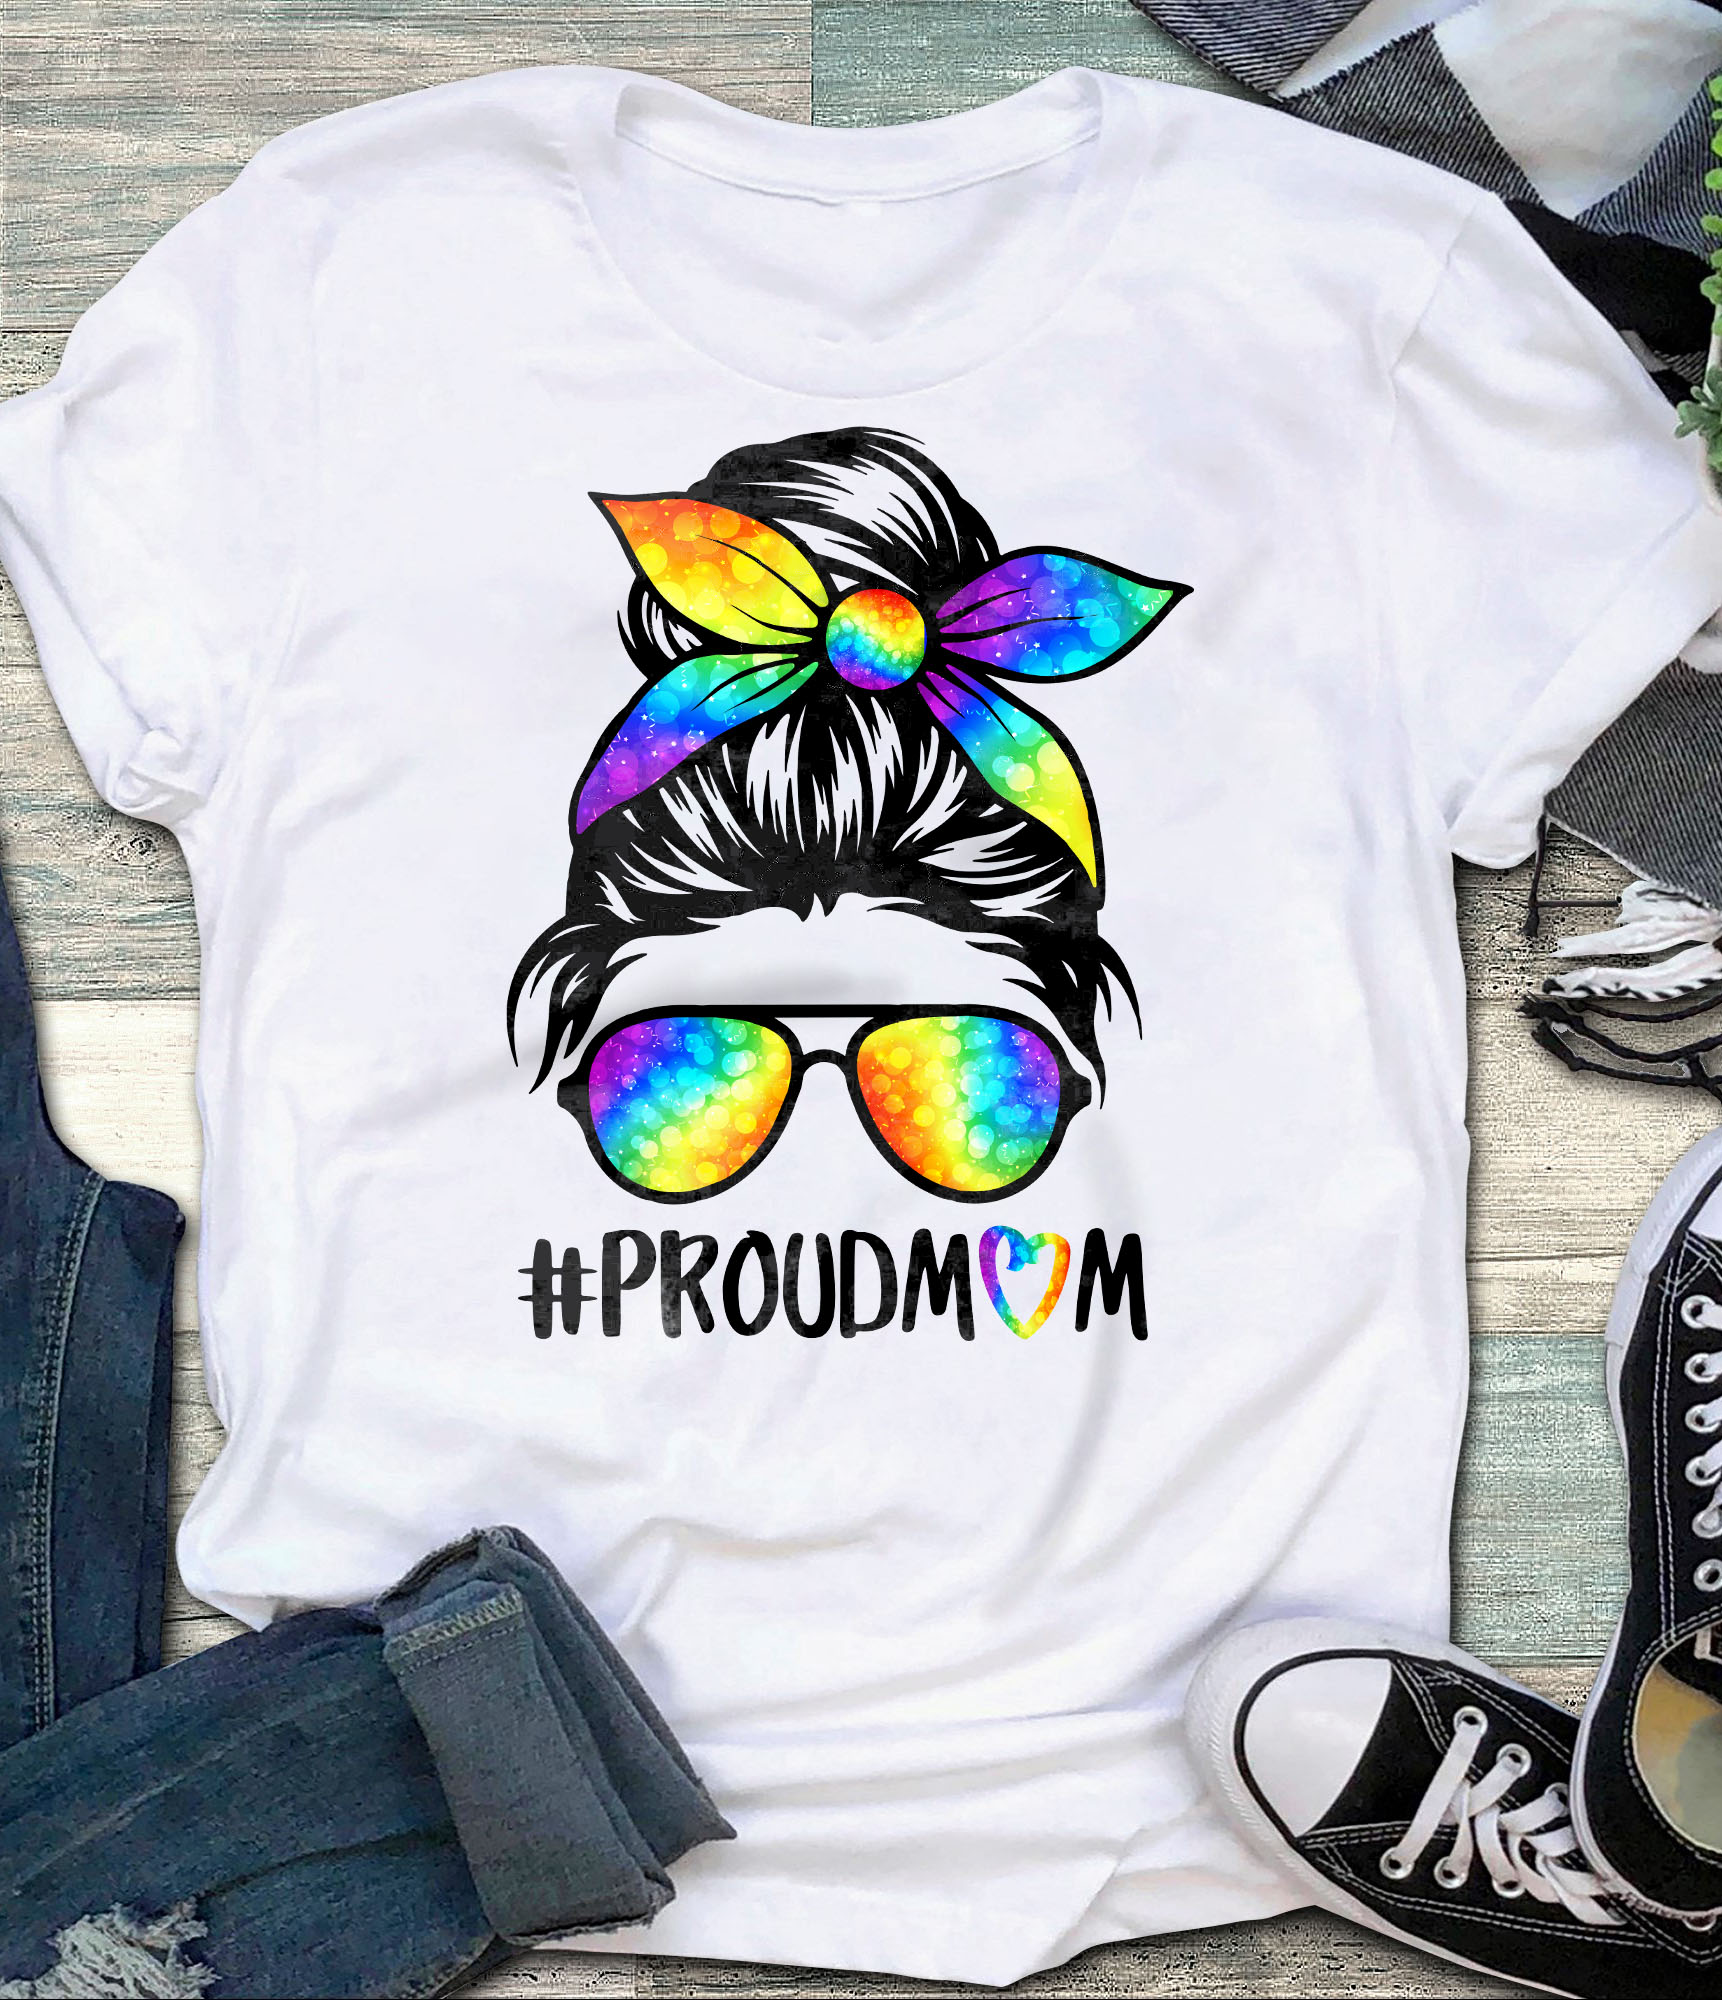 Proudmom - Colorful Woman Face